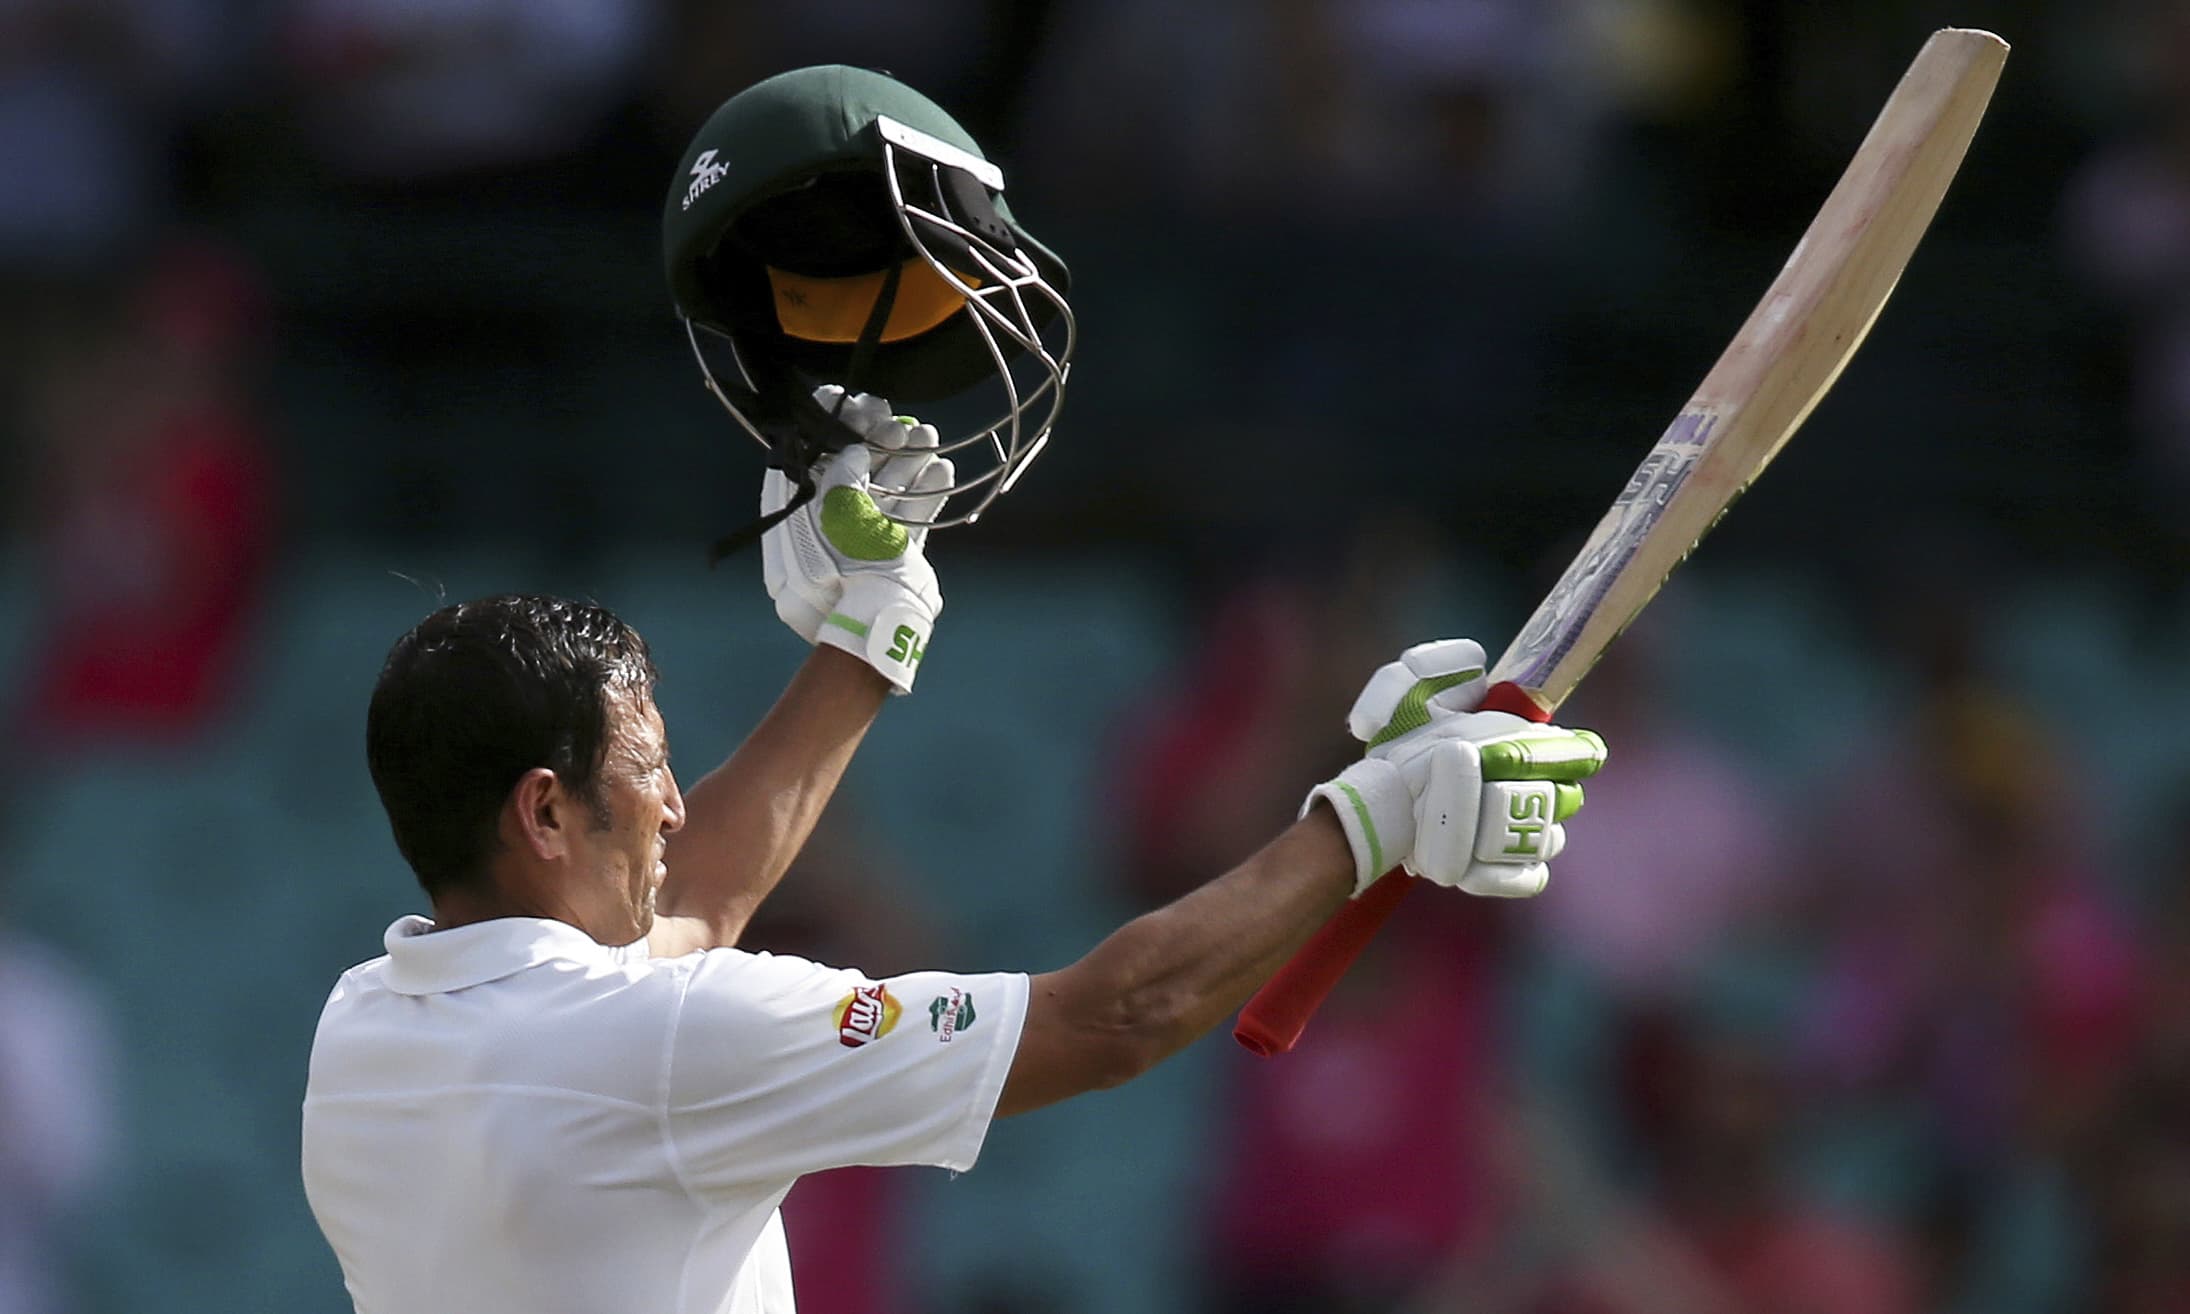 Younis remains one of the most underrated batsman